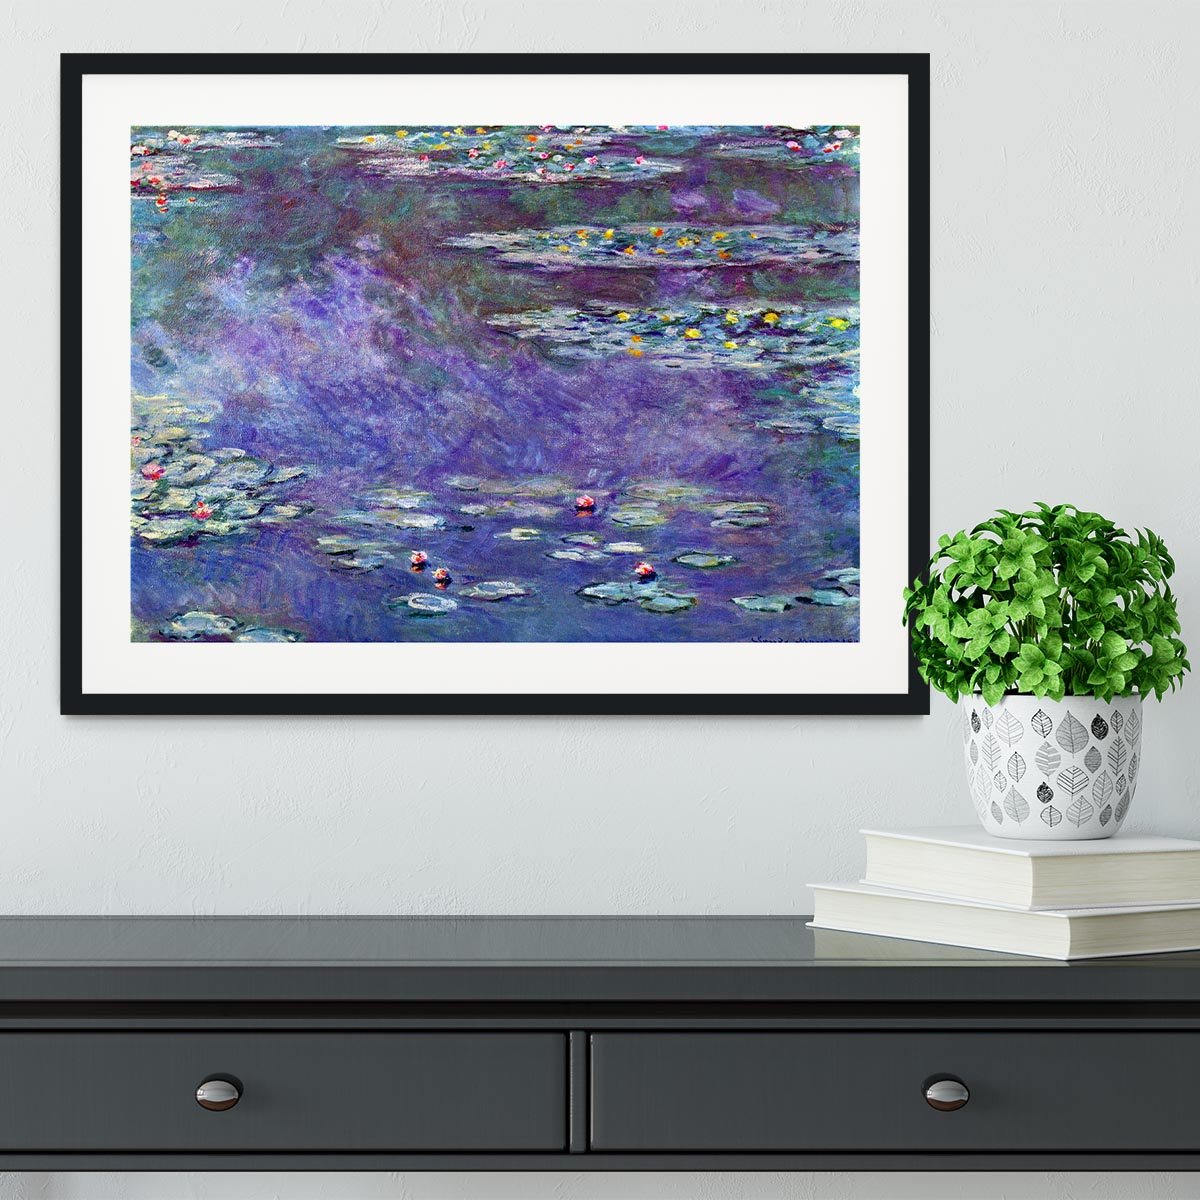 Water Lily Pond 3 by Monet Framed Print - Canvas Art Rocks - 1